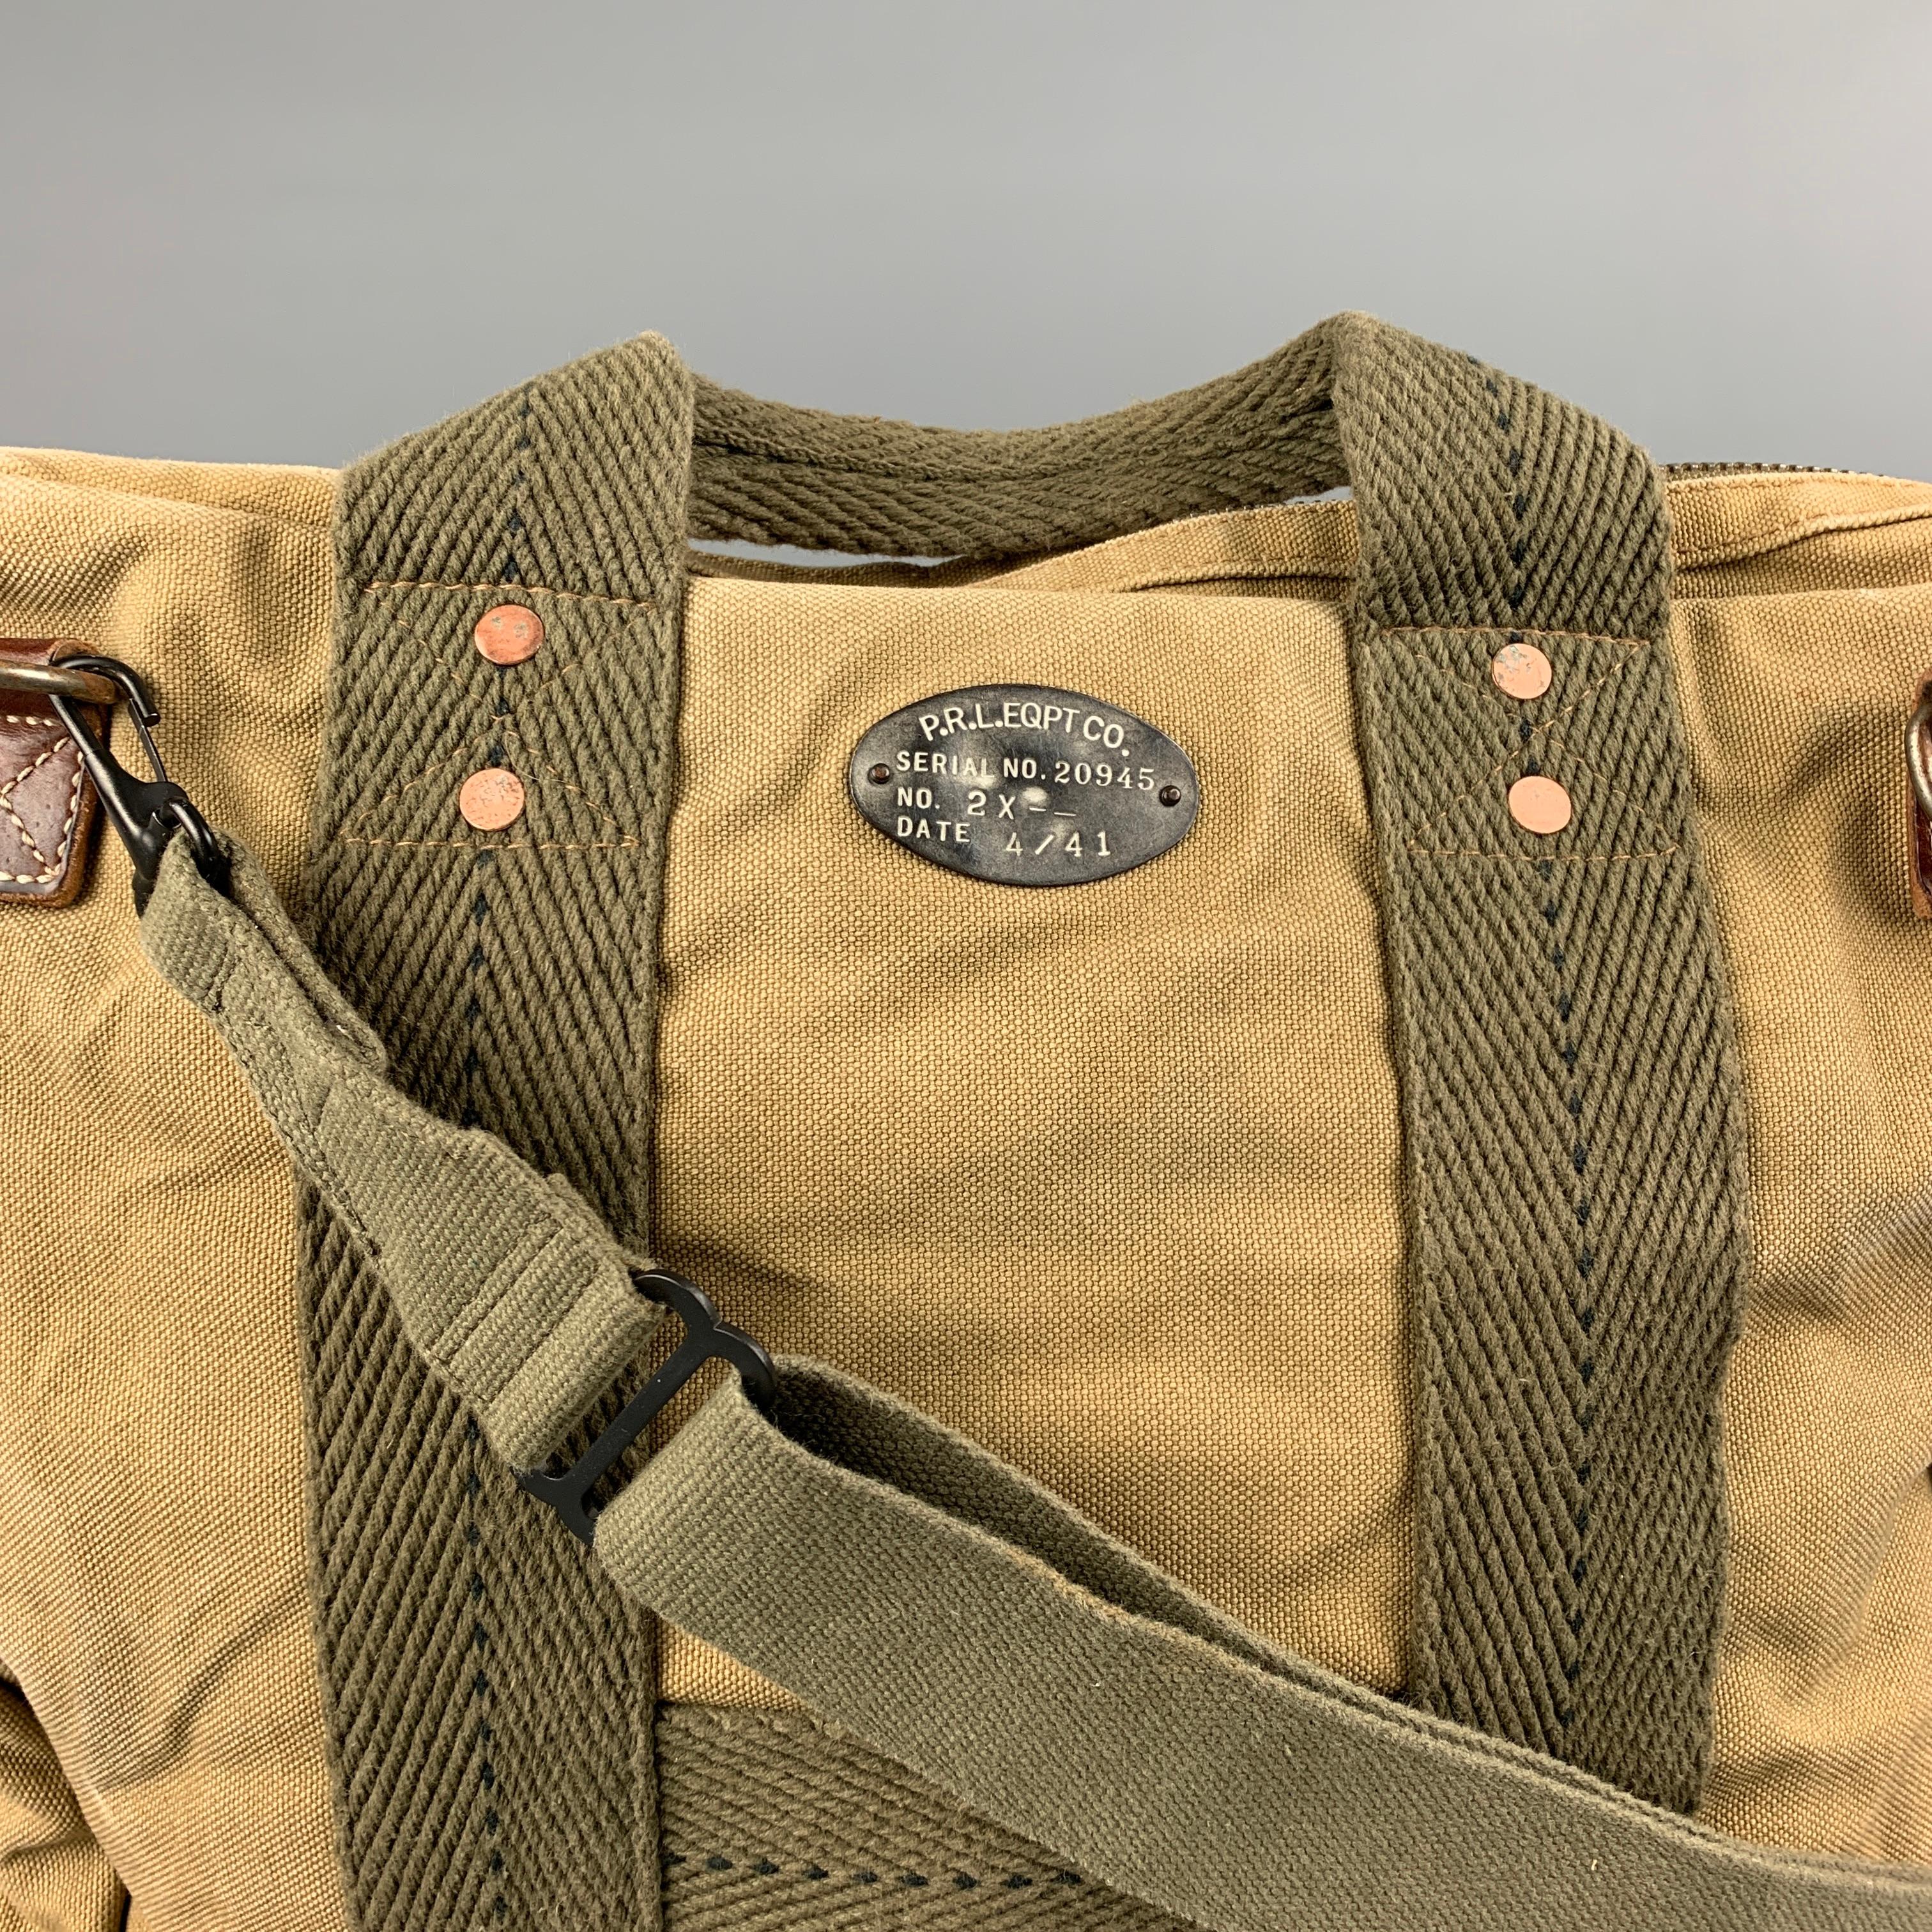 RRL by RALPH LAUREN Limited Edition Utility Equipment cross body bag comes in a khaki & olive canvas featuring a 